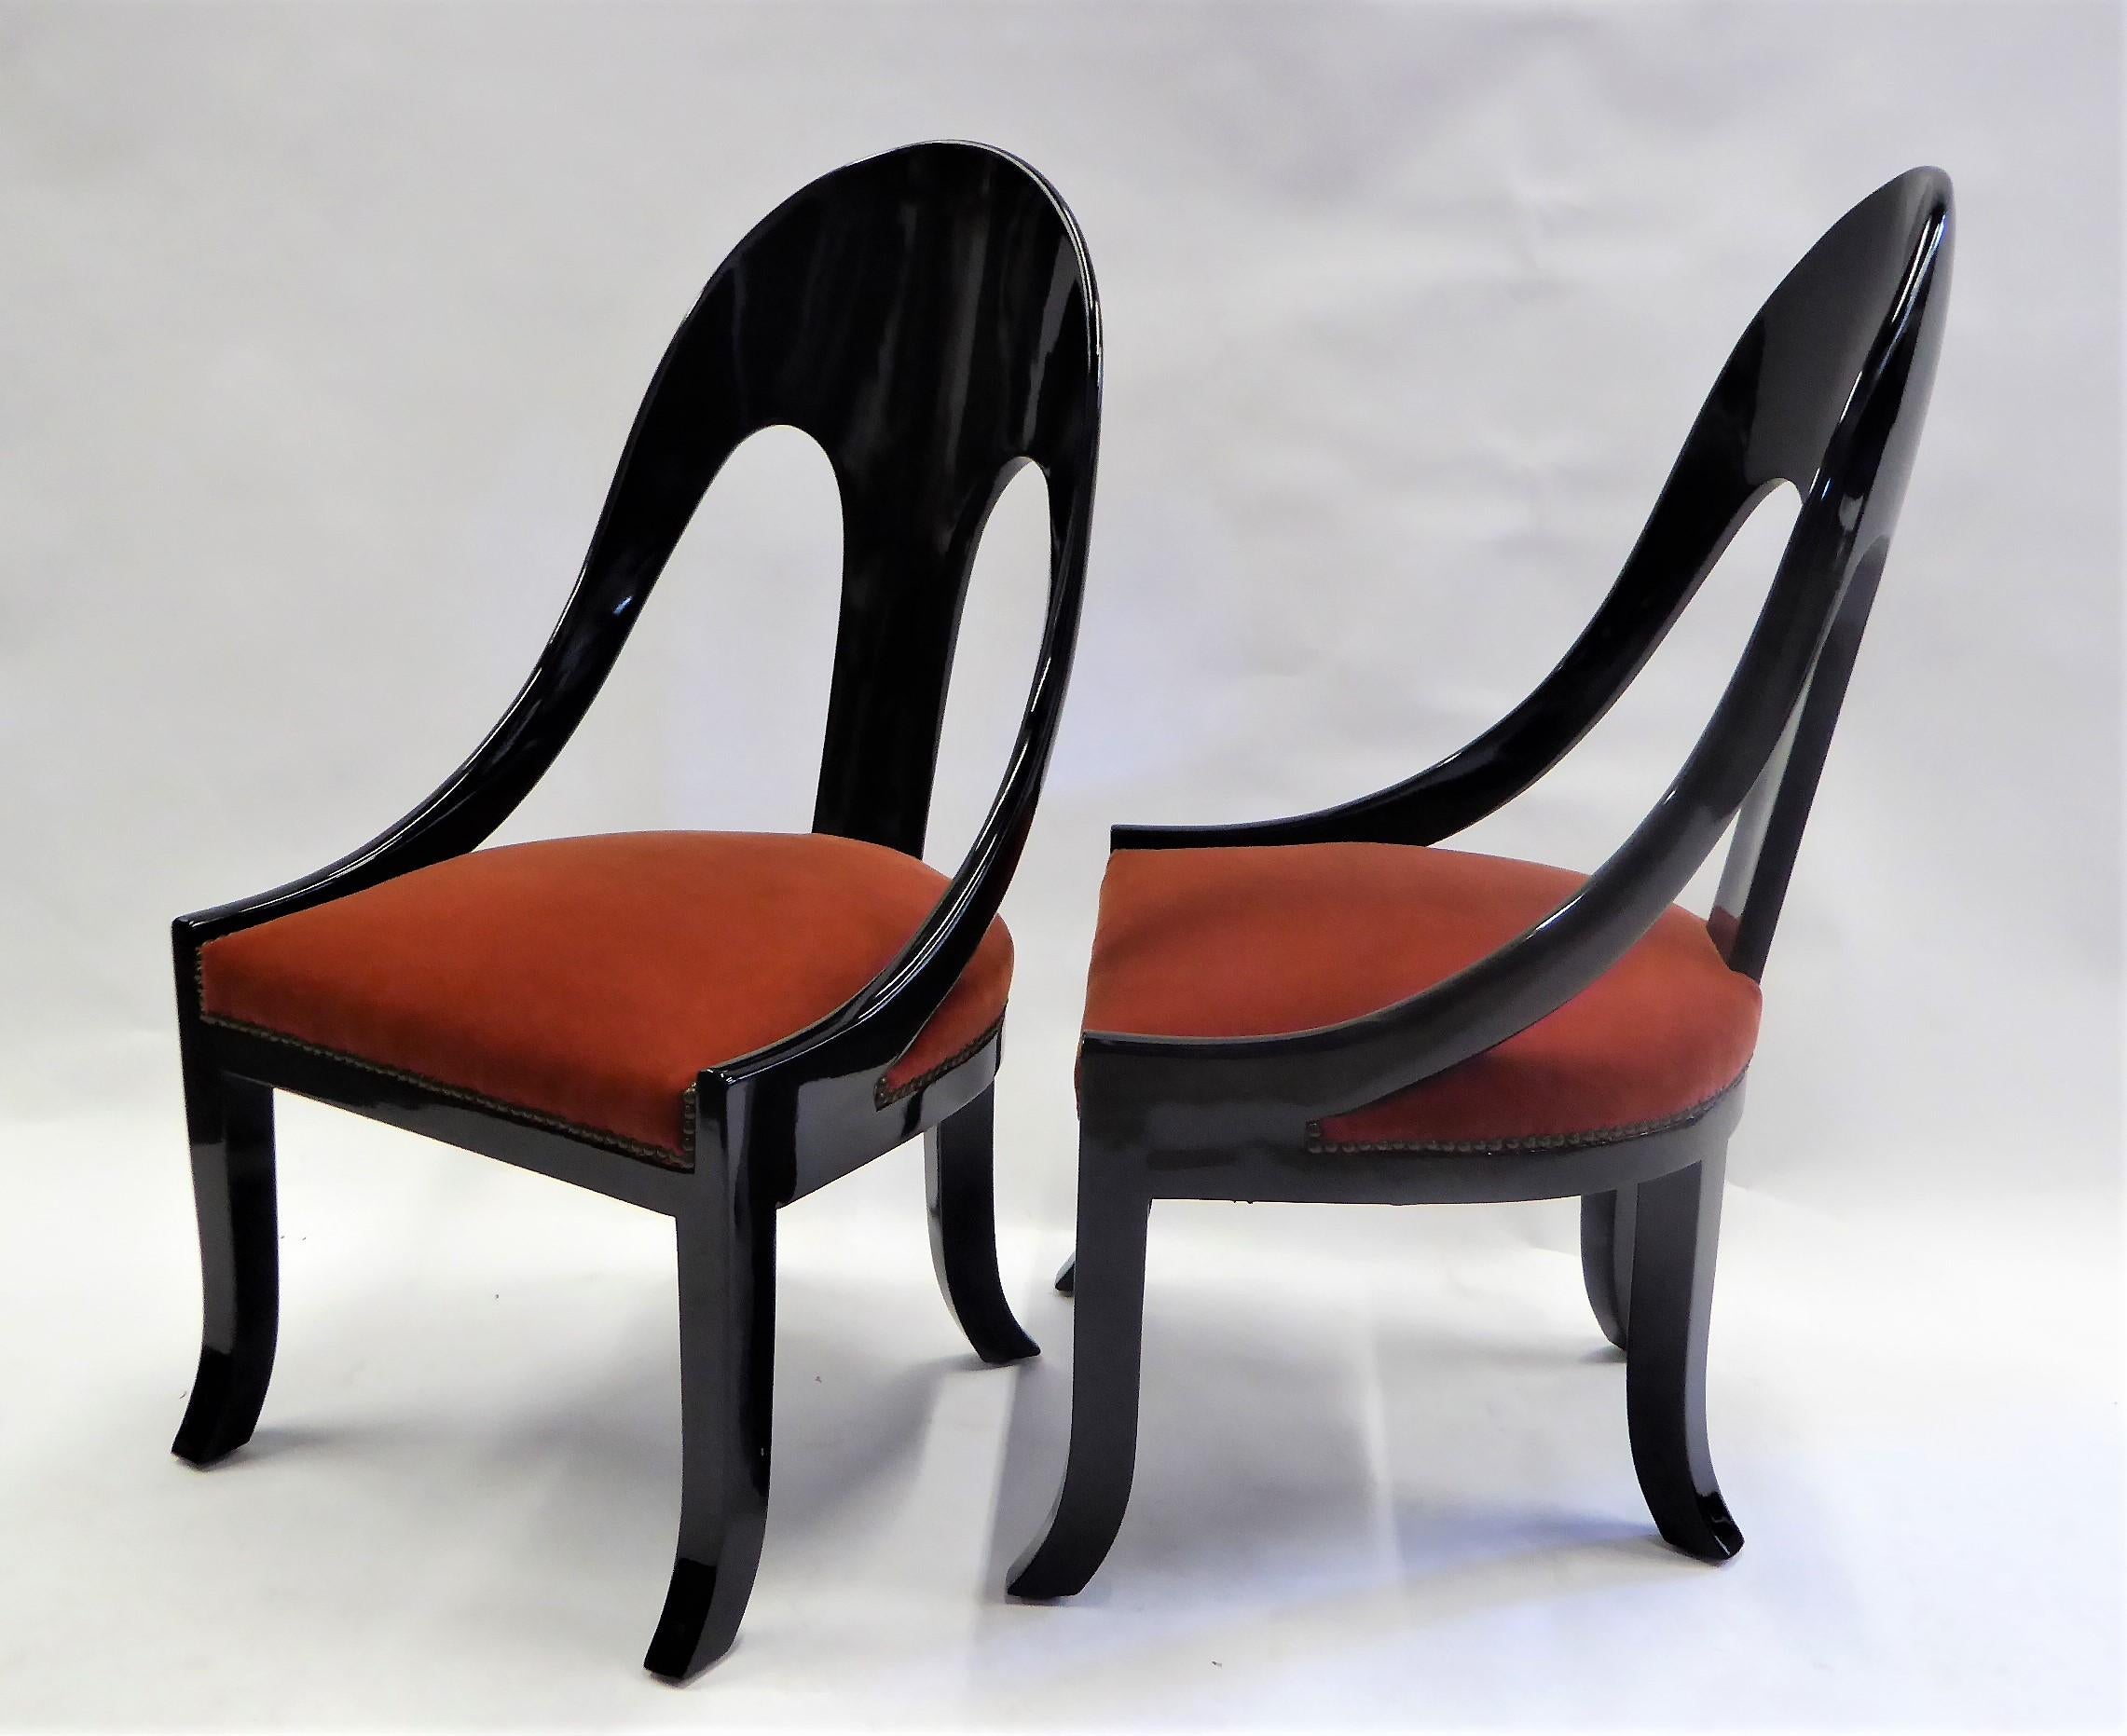 Mid-20th Century 1930s Art Deco Black Lacquered Spoonback Chairs in Mohair Velvet